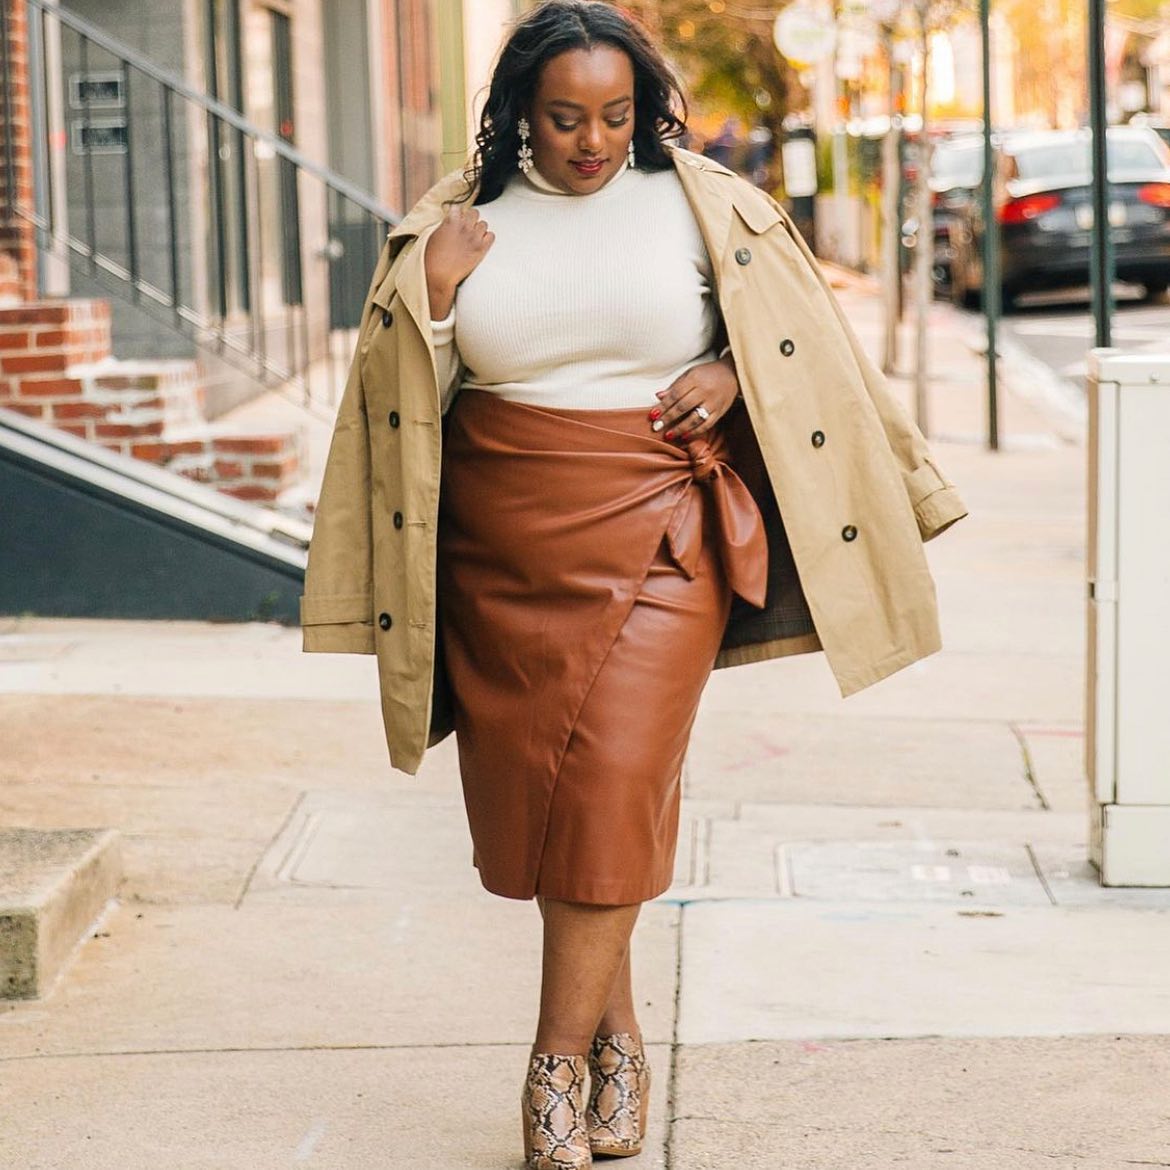 plus size personal style